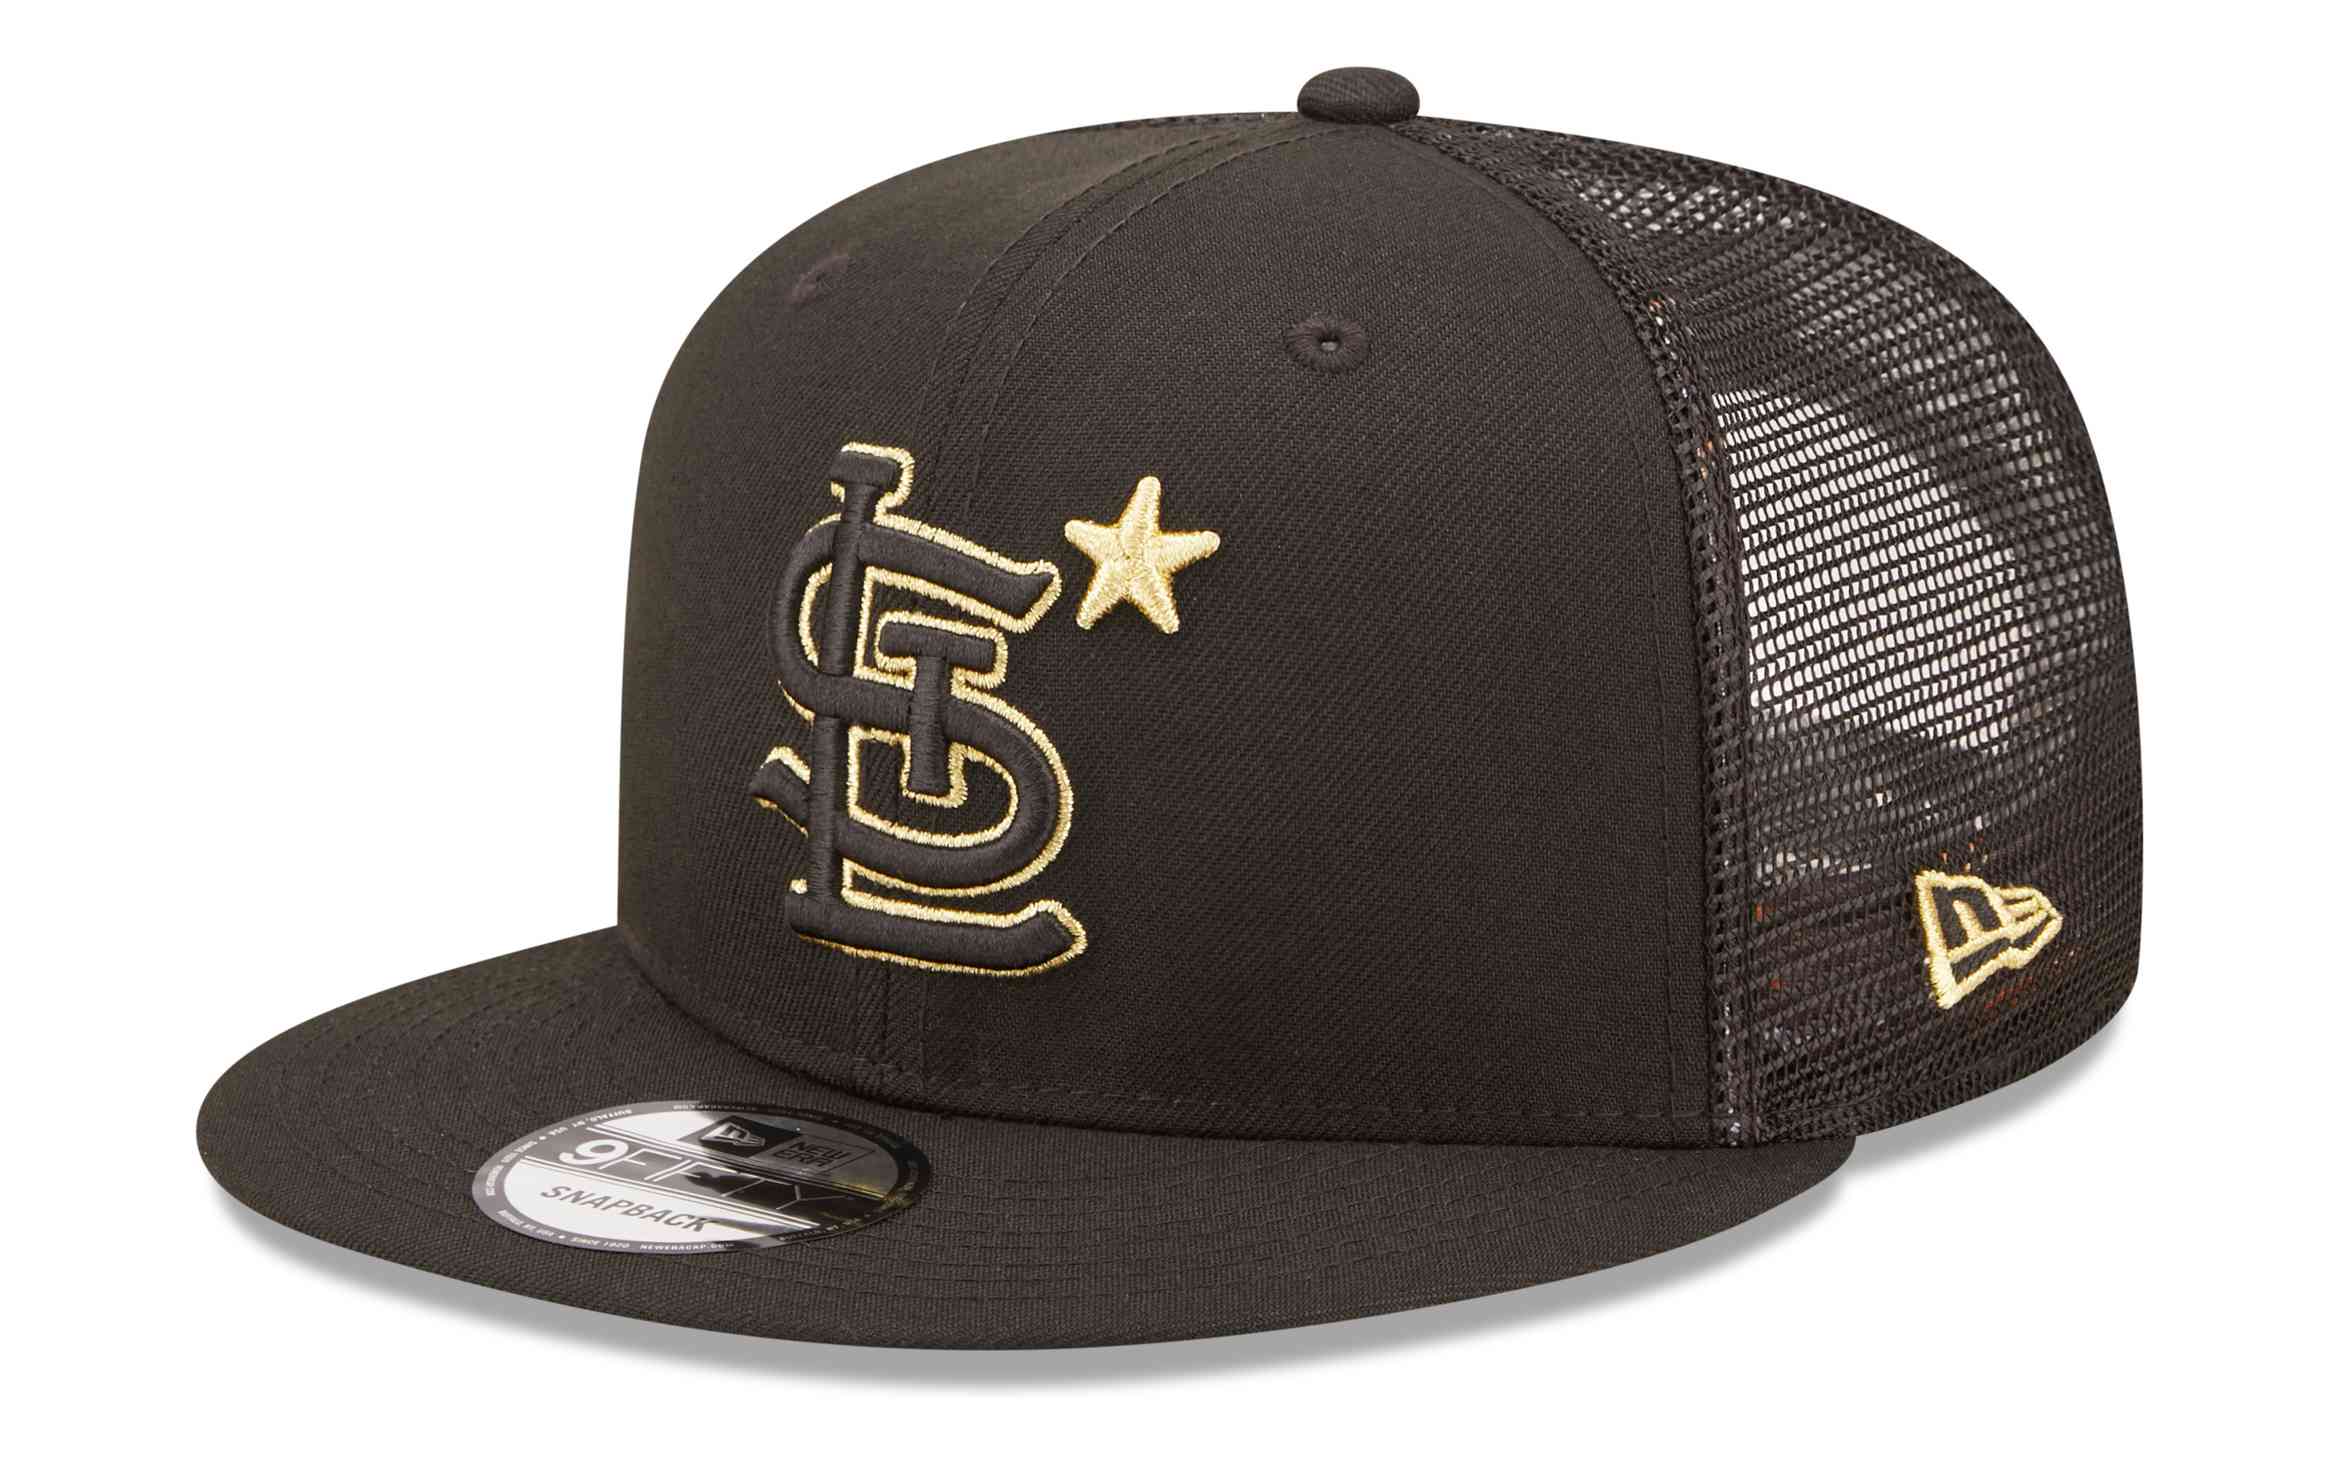 New Era - MLB St. Louis Cardinals All Star Game Patch 9Fifty